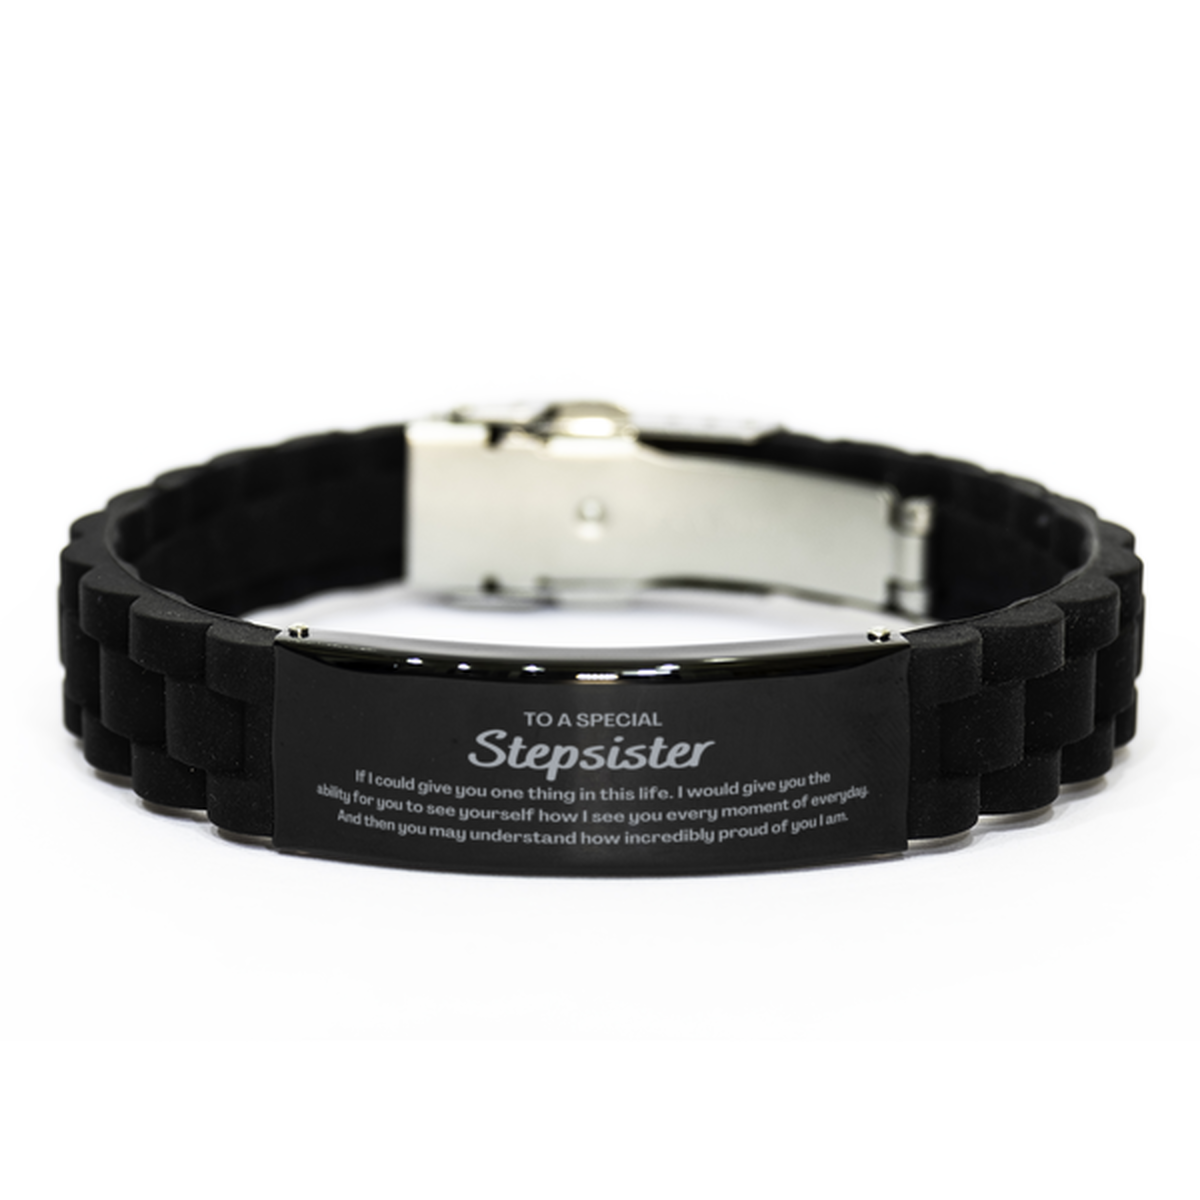 To My Stepsister Black Glidelock Clasp Bracelet, Gifts For Stepsister Engraved, Inspirational Gifts for Christmas Birthday, Epic Gifts for Stepsister To A Special Stepsister how incredibly proud of you I am